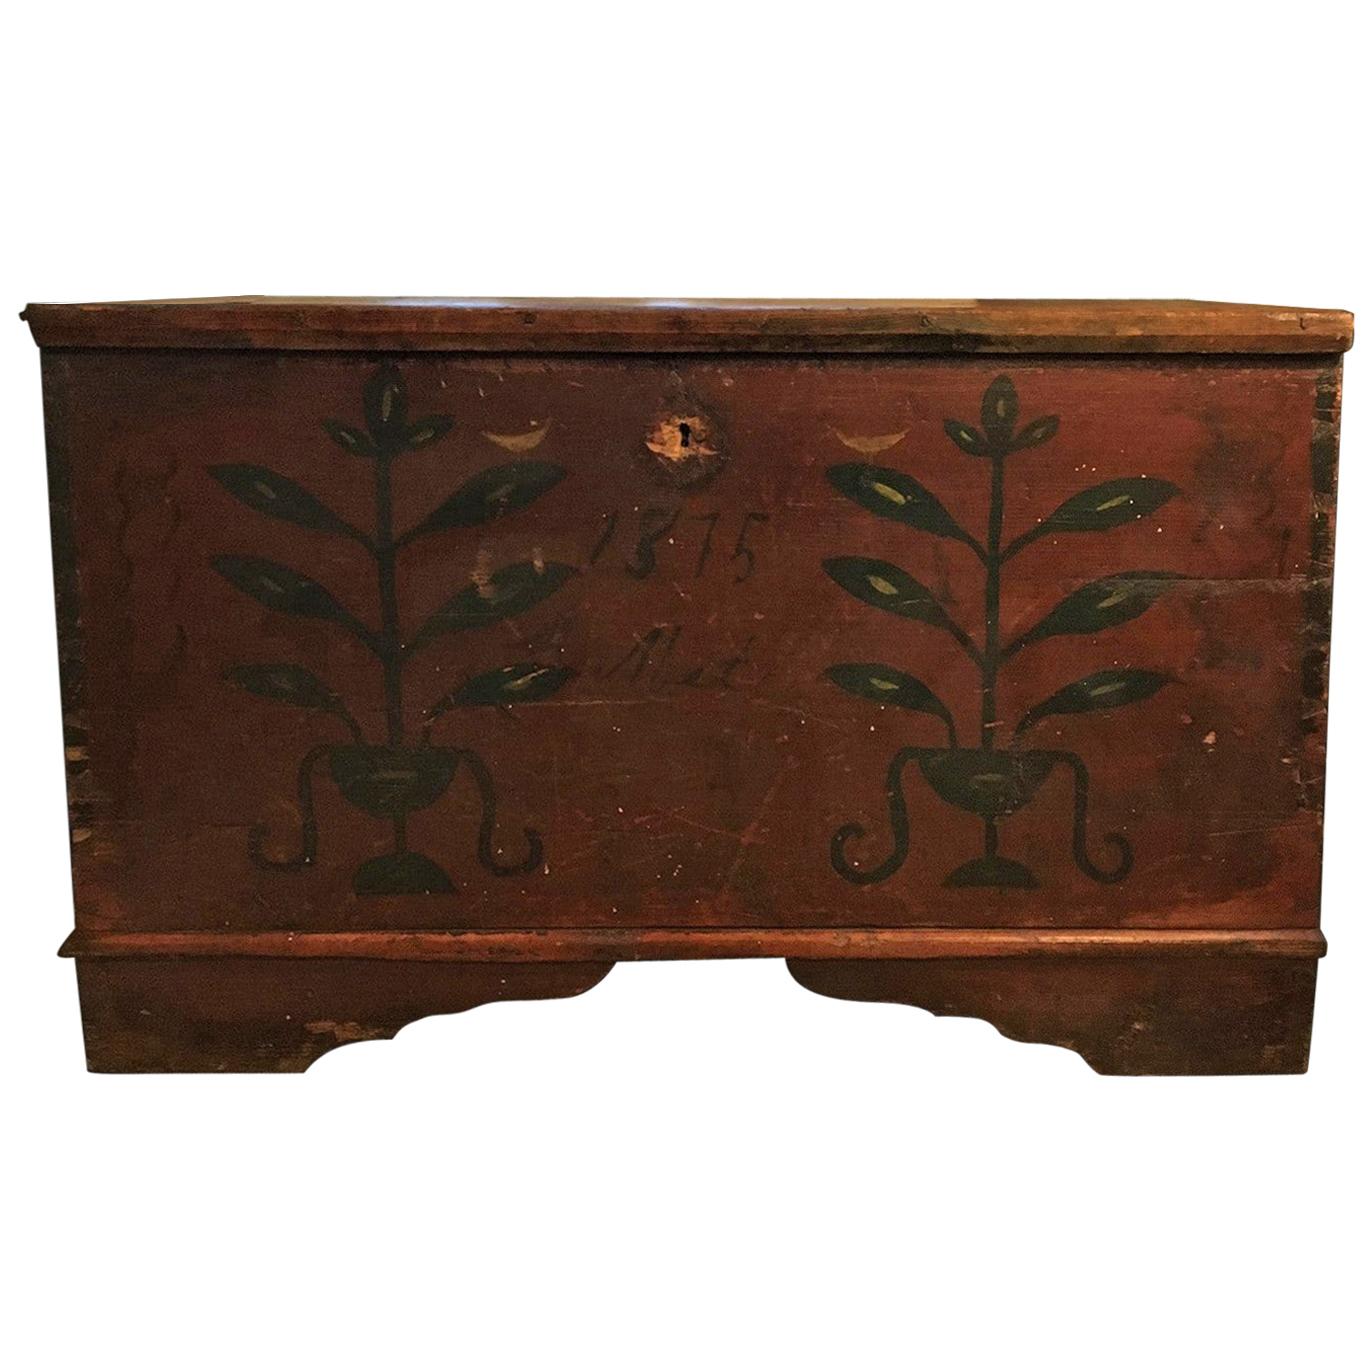 18th Century American Pine Decorated Blanket Chest